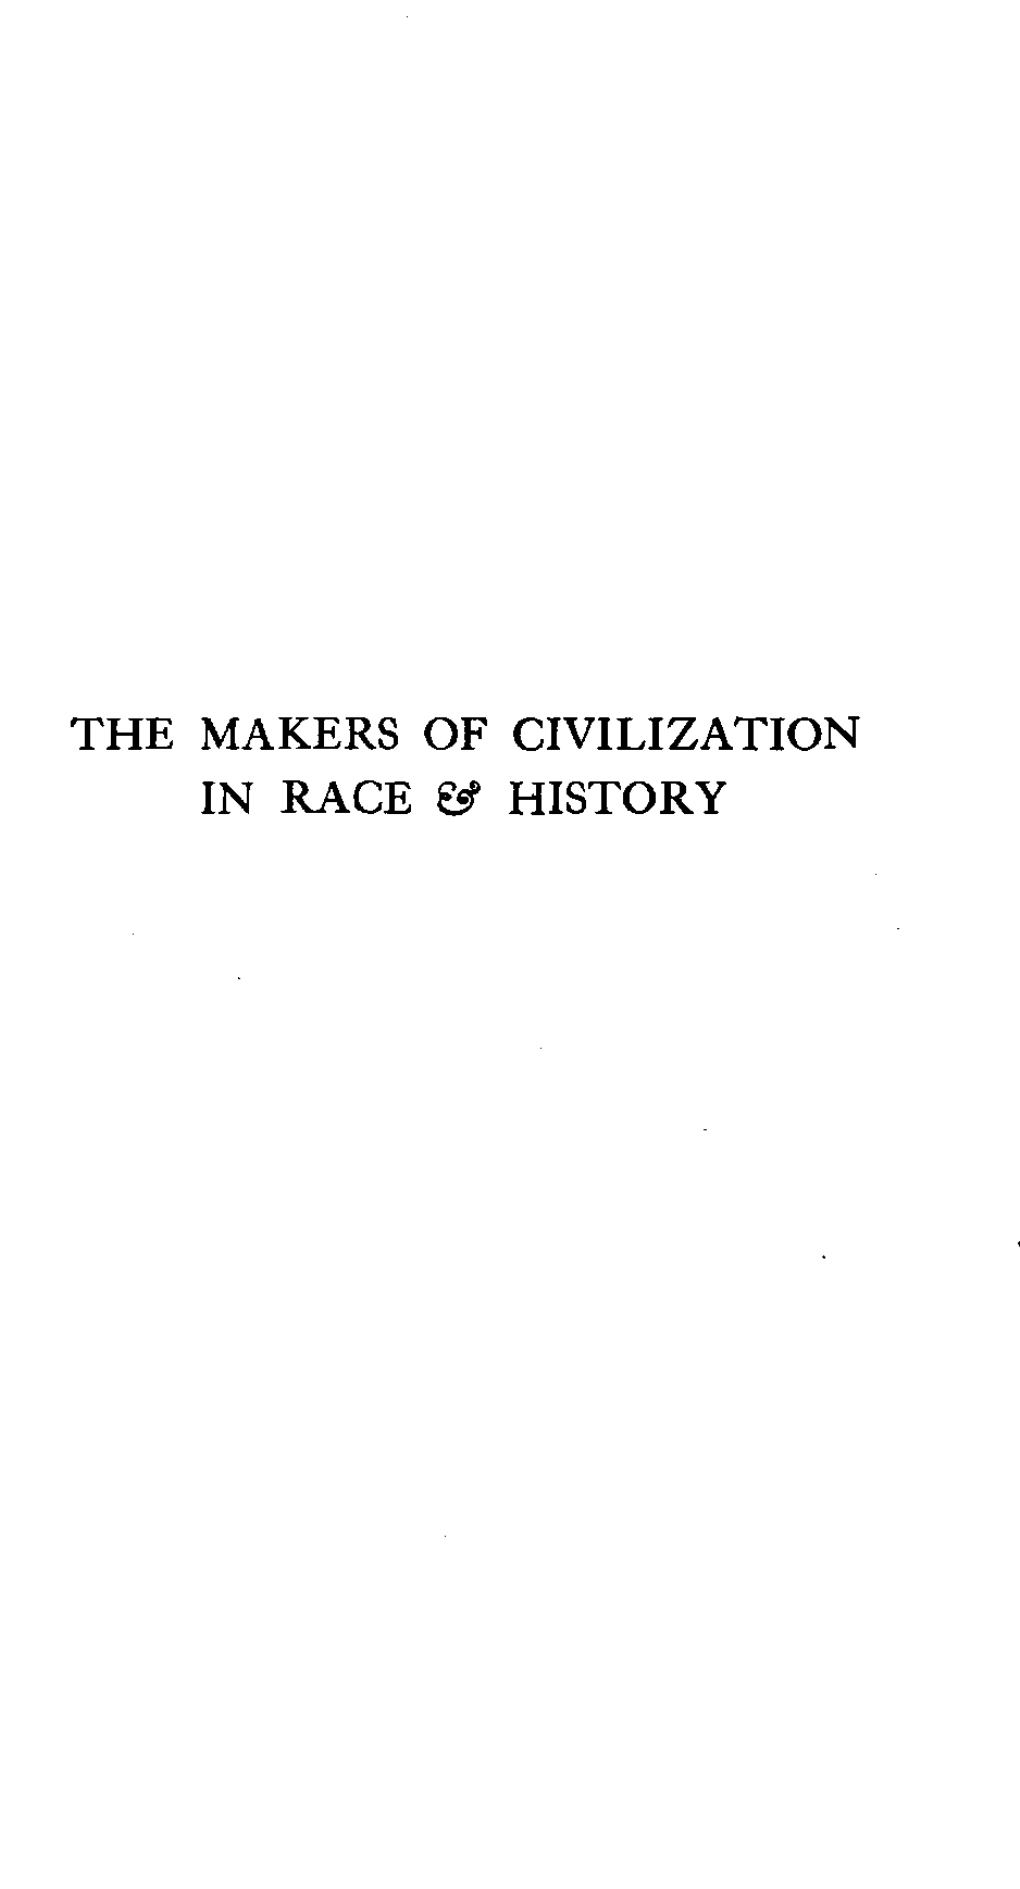 The Makers of Civilization in Race &! History Works by the Same Author